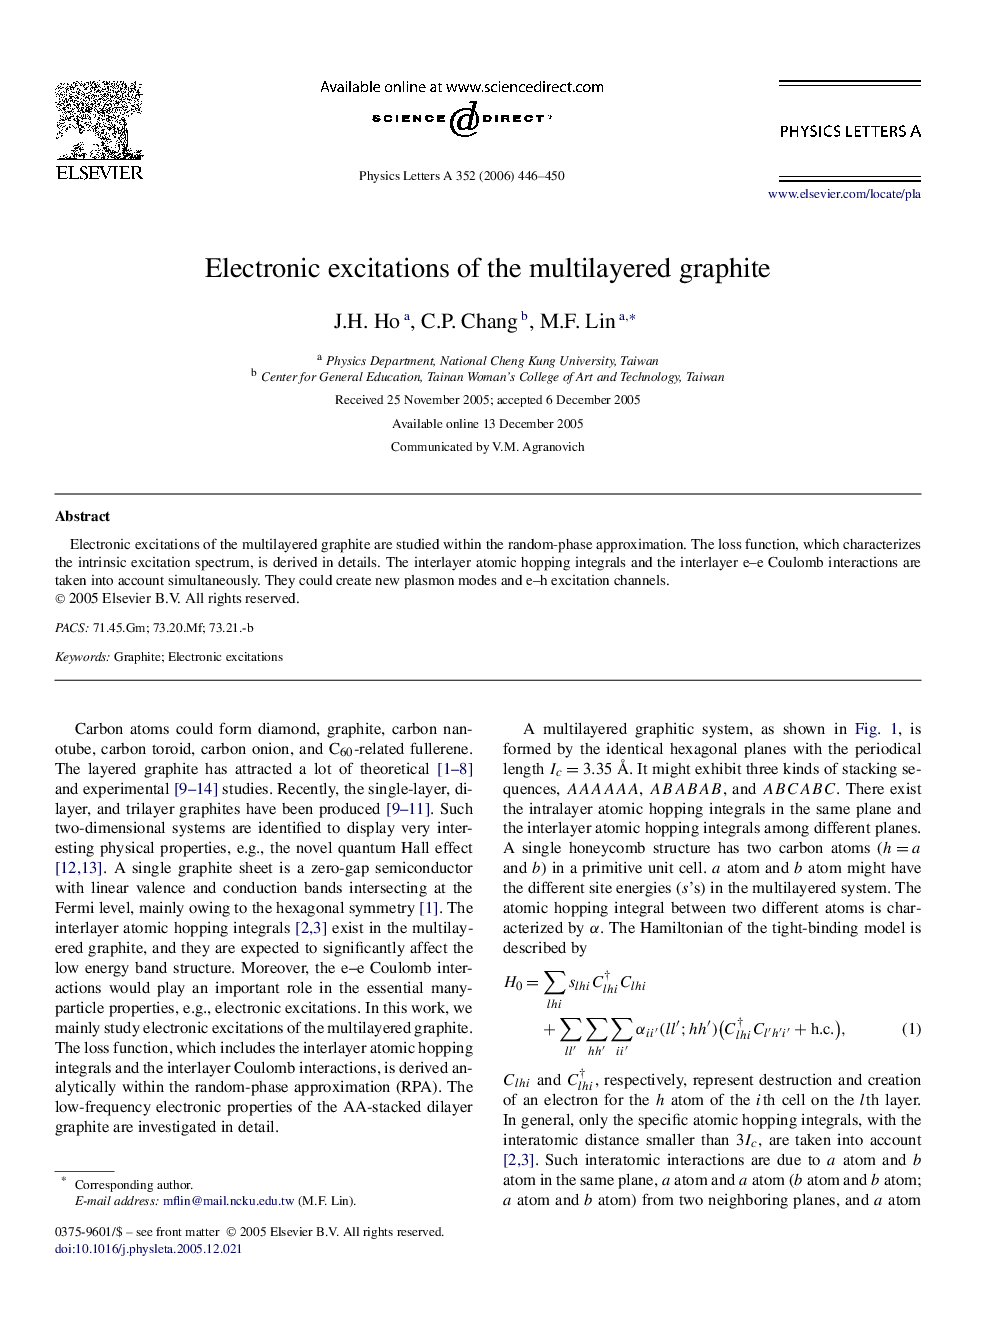 Electronic excitations of the multilayered graphite